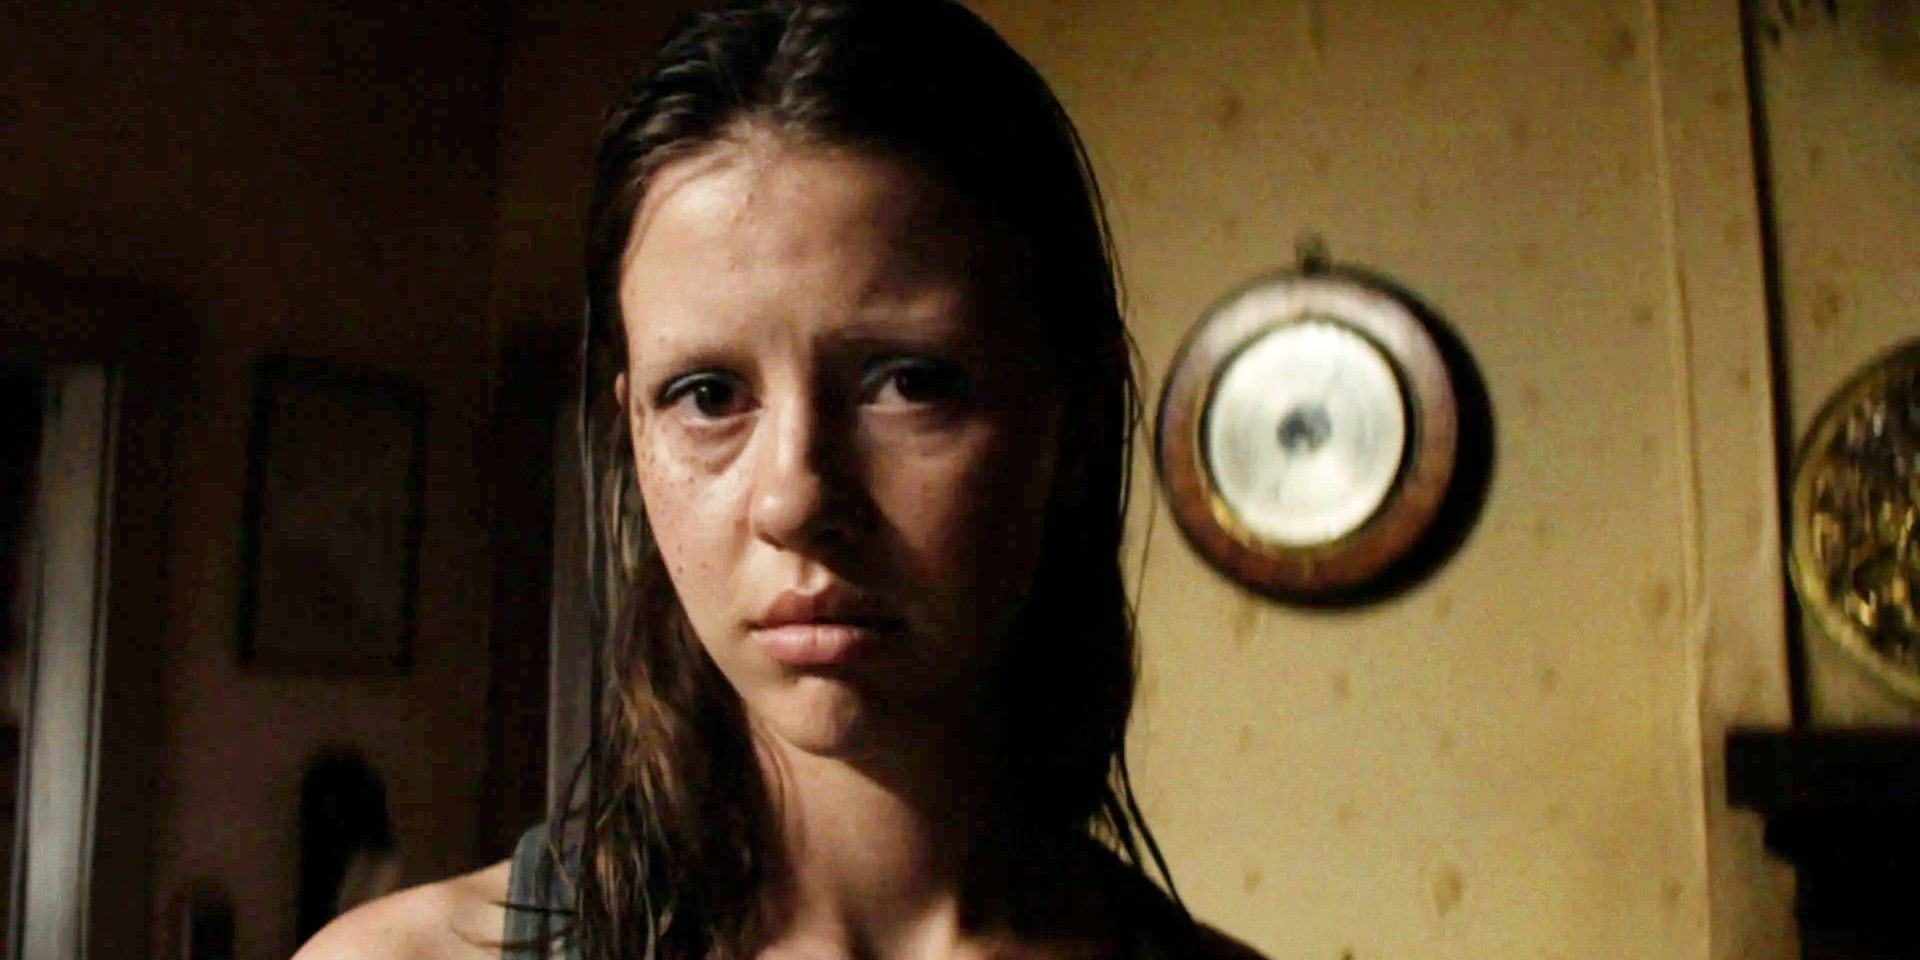 Mia Goth as Pearl/Maxine looking at the camera with a sad expression in X